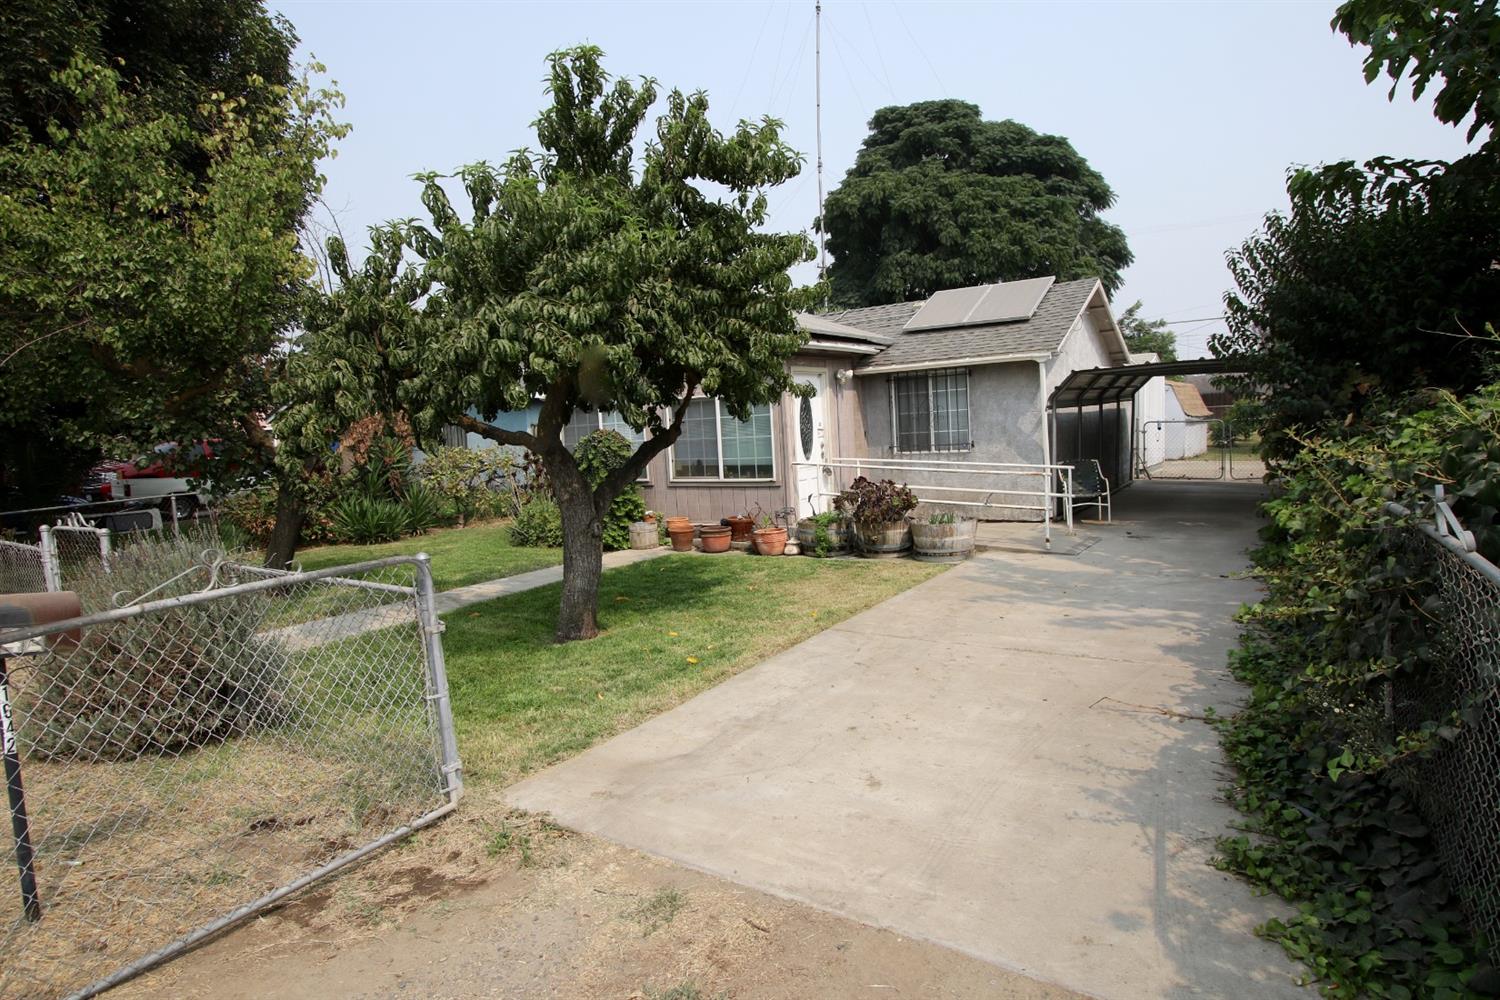 a view of a house with a yard plants and large tree